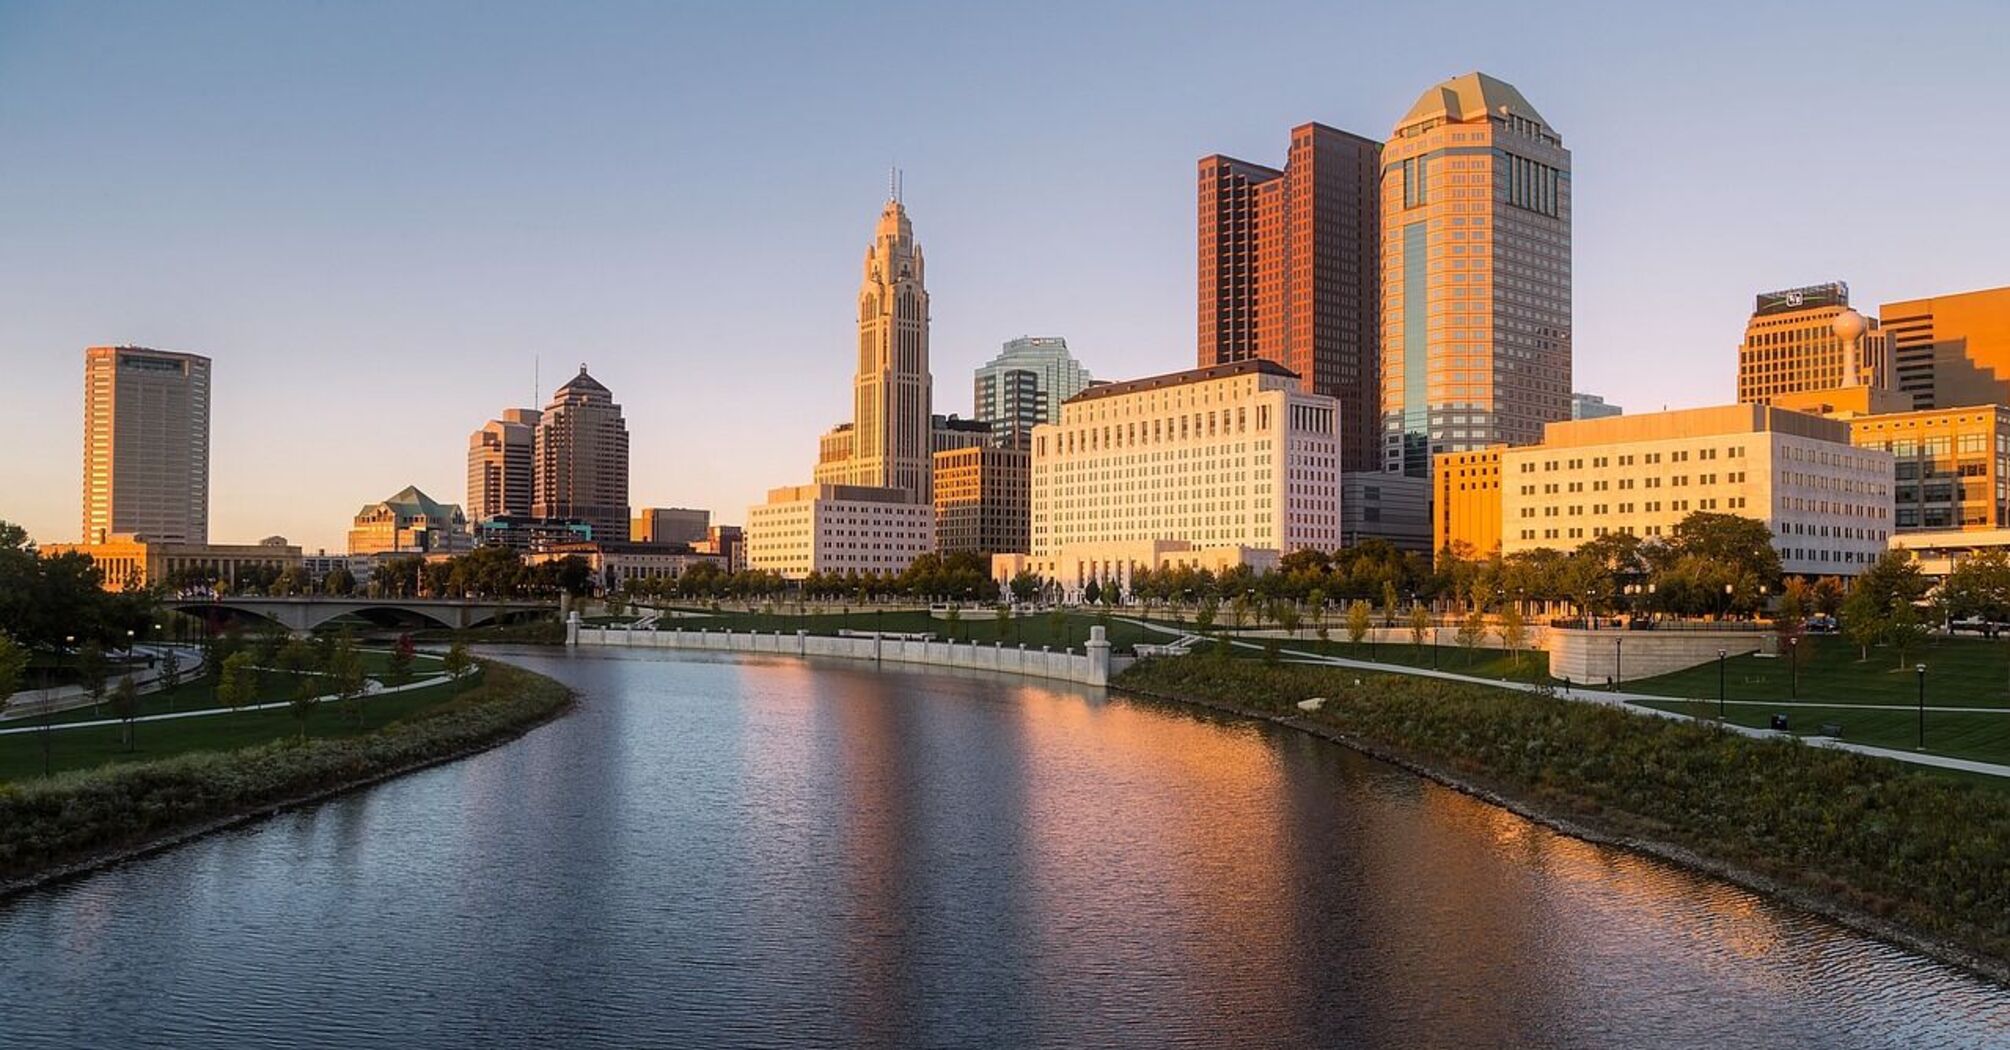 Top 16 tourist attractions in Ohio that you can't miss